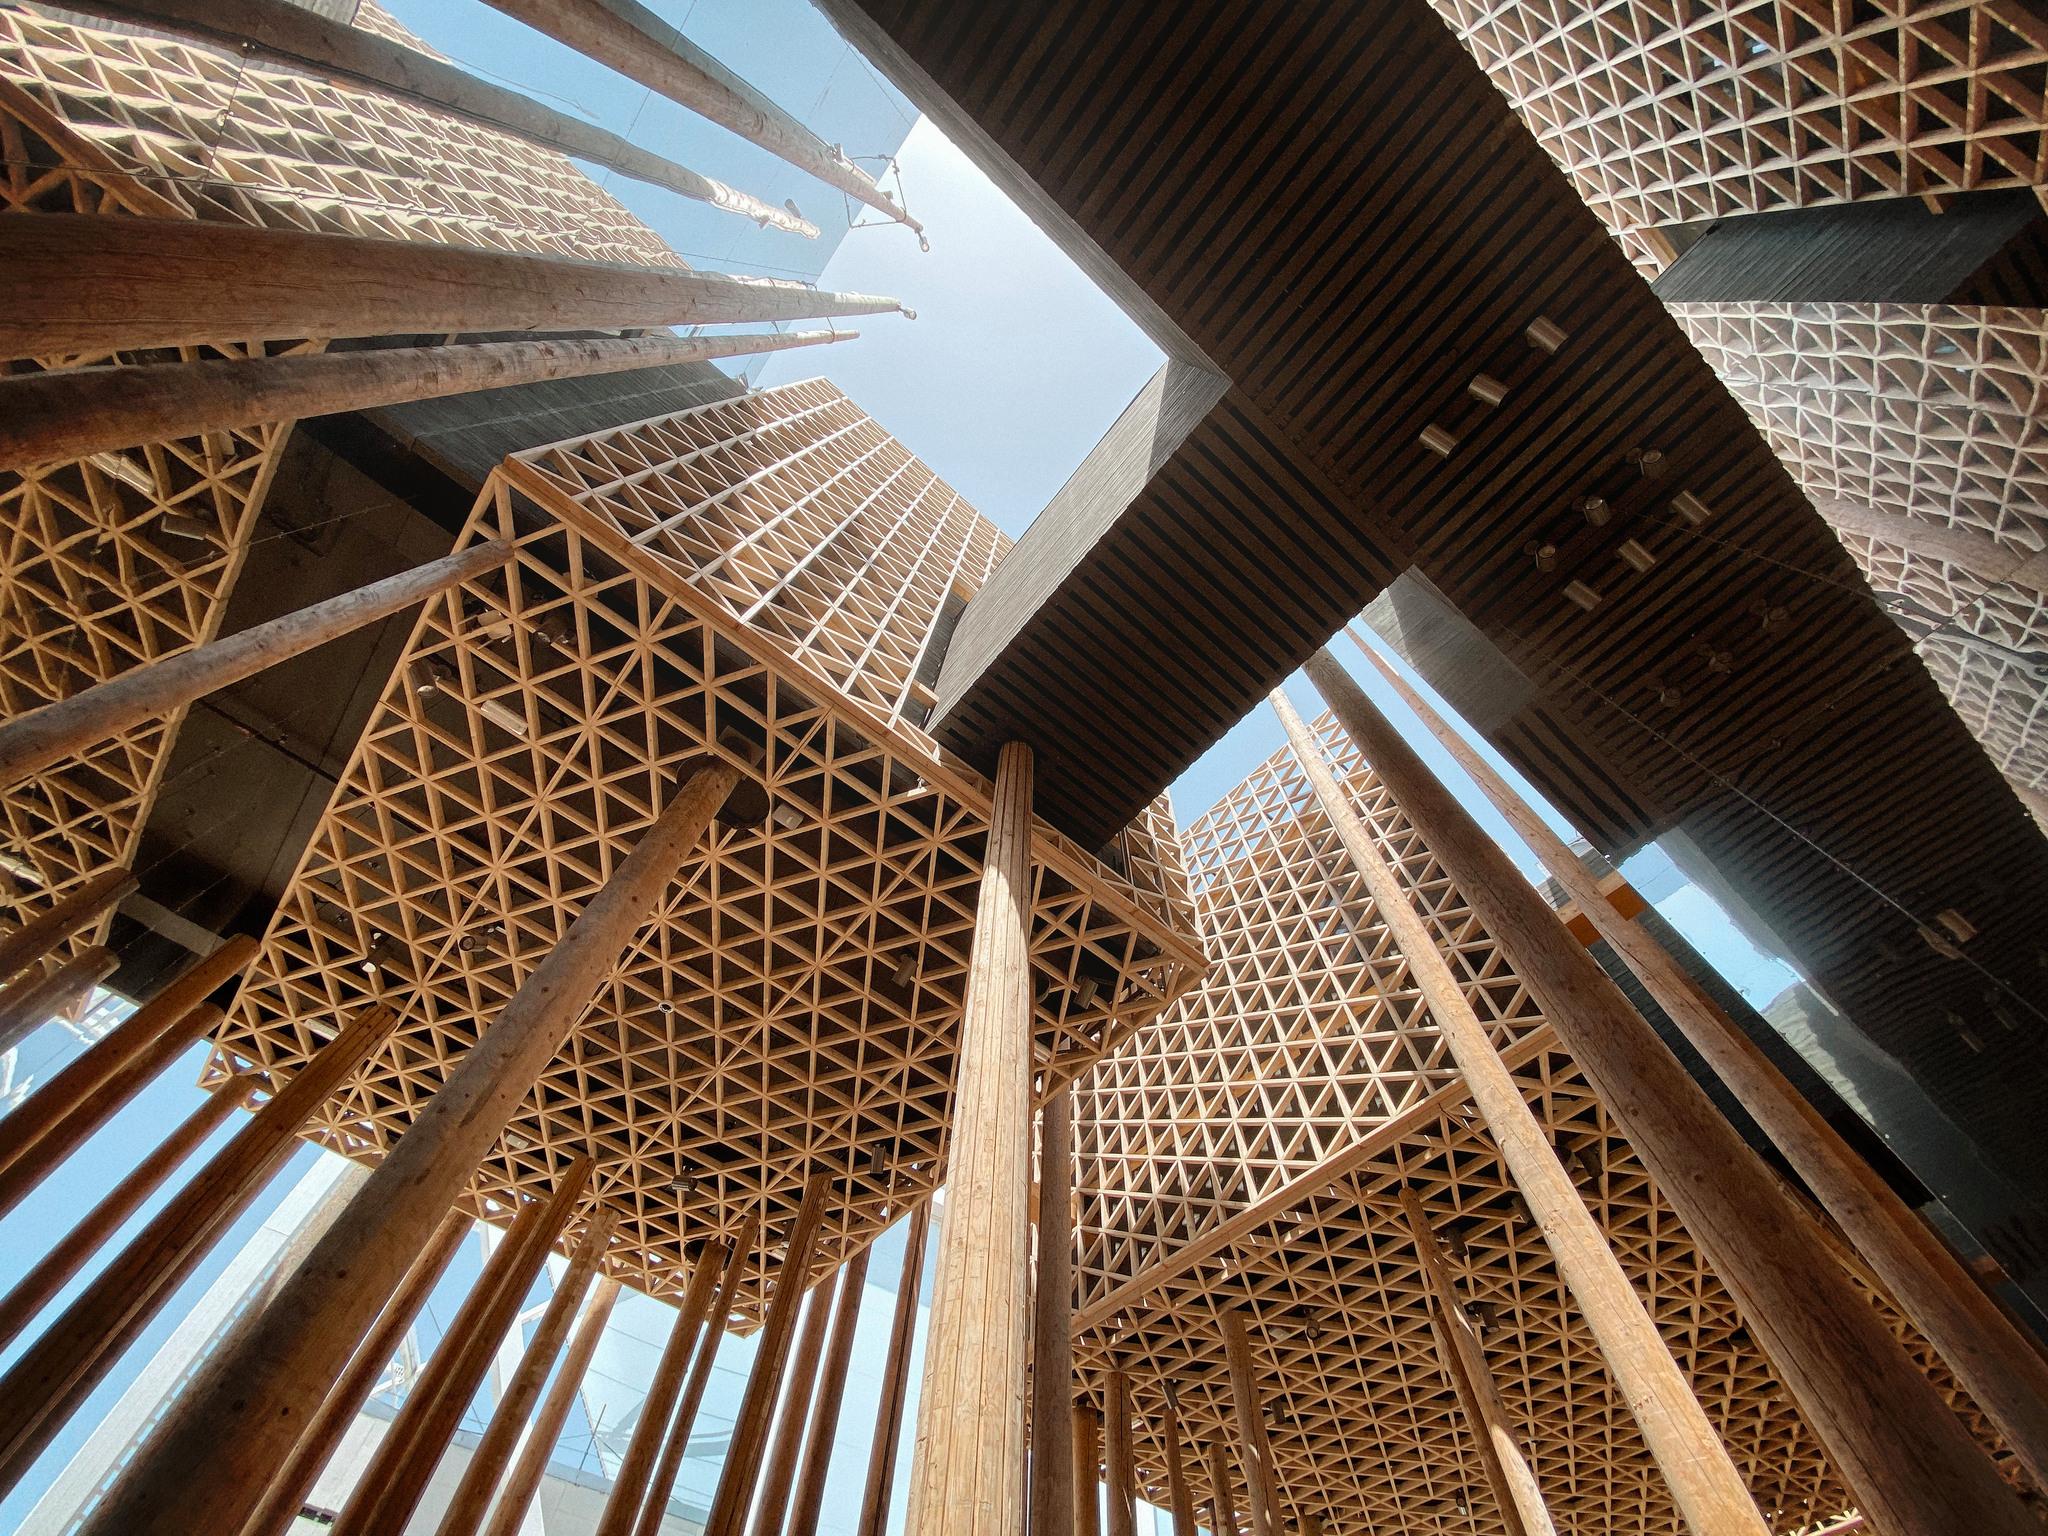 Part view of the wooden Swedish pavilion at Expo 2020, seen from below, blue sky in the background.